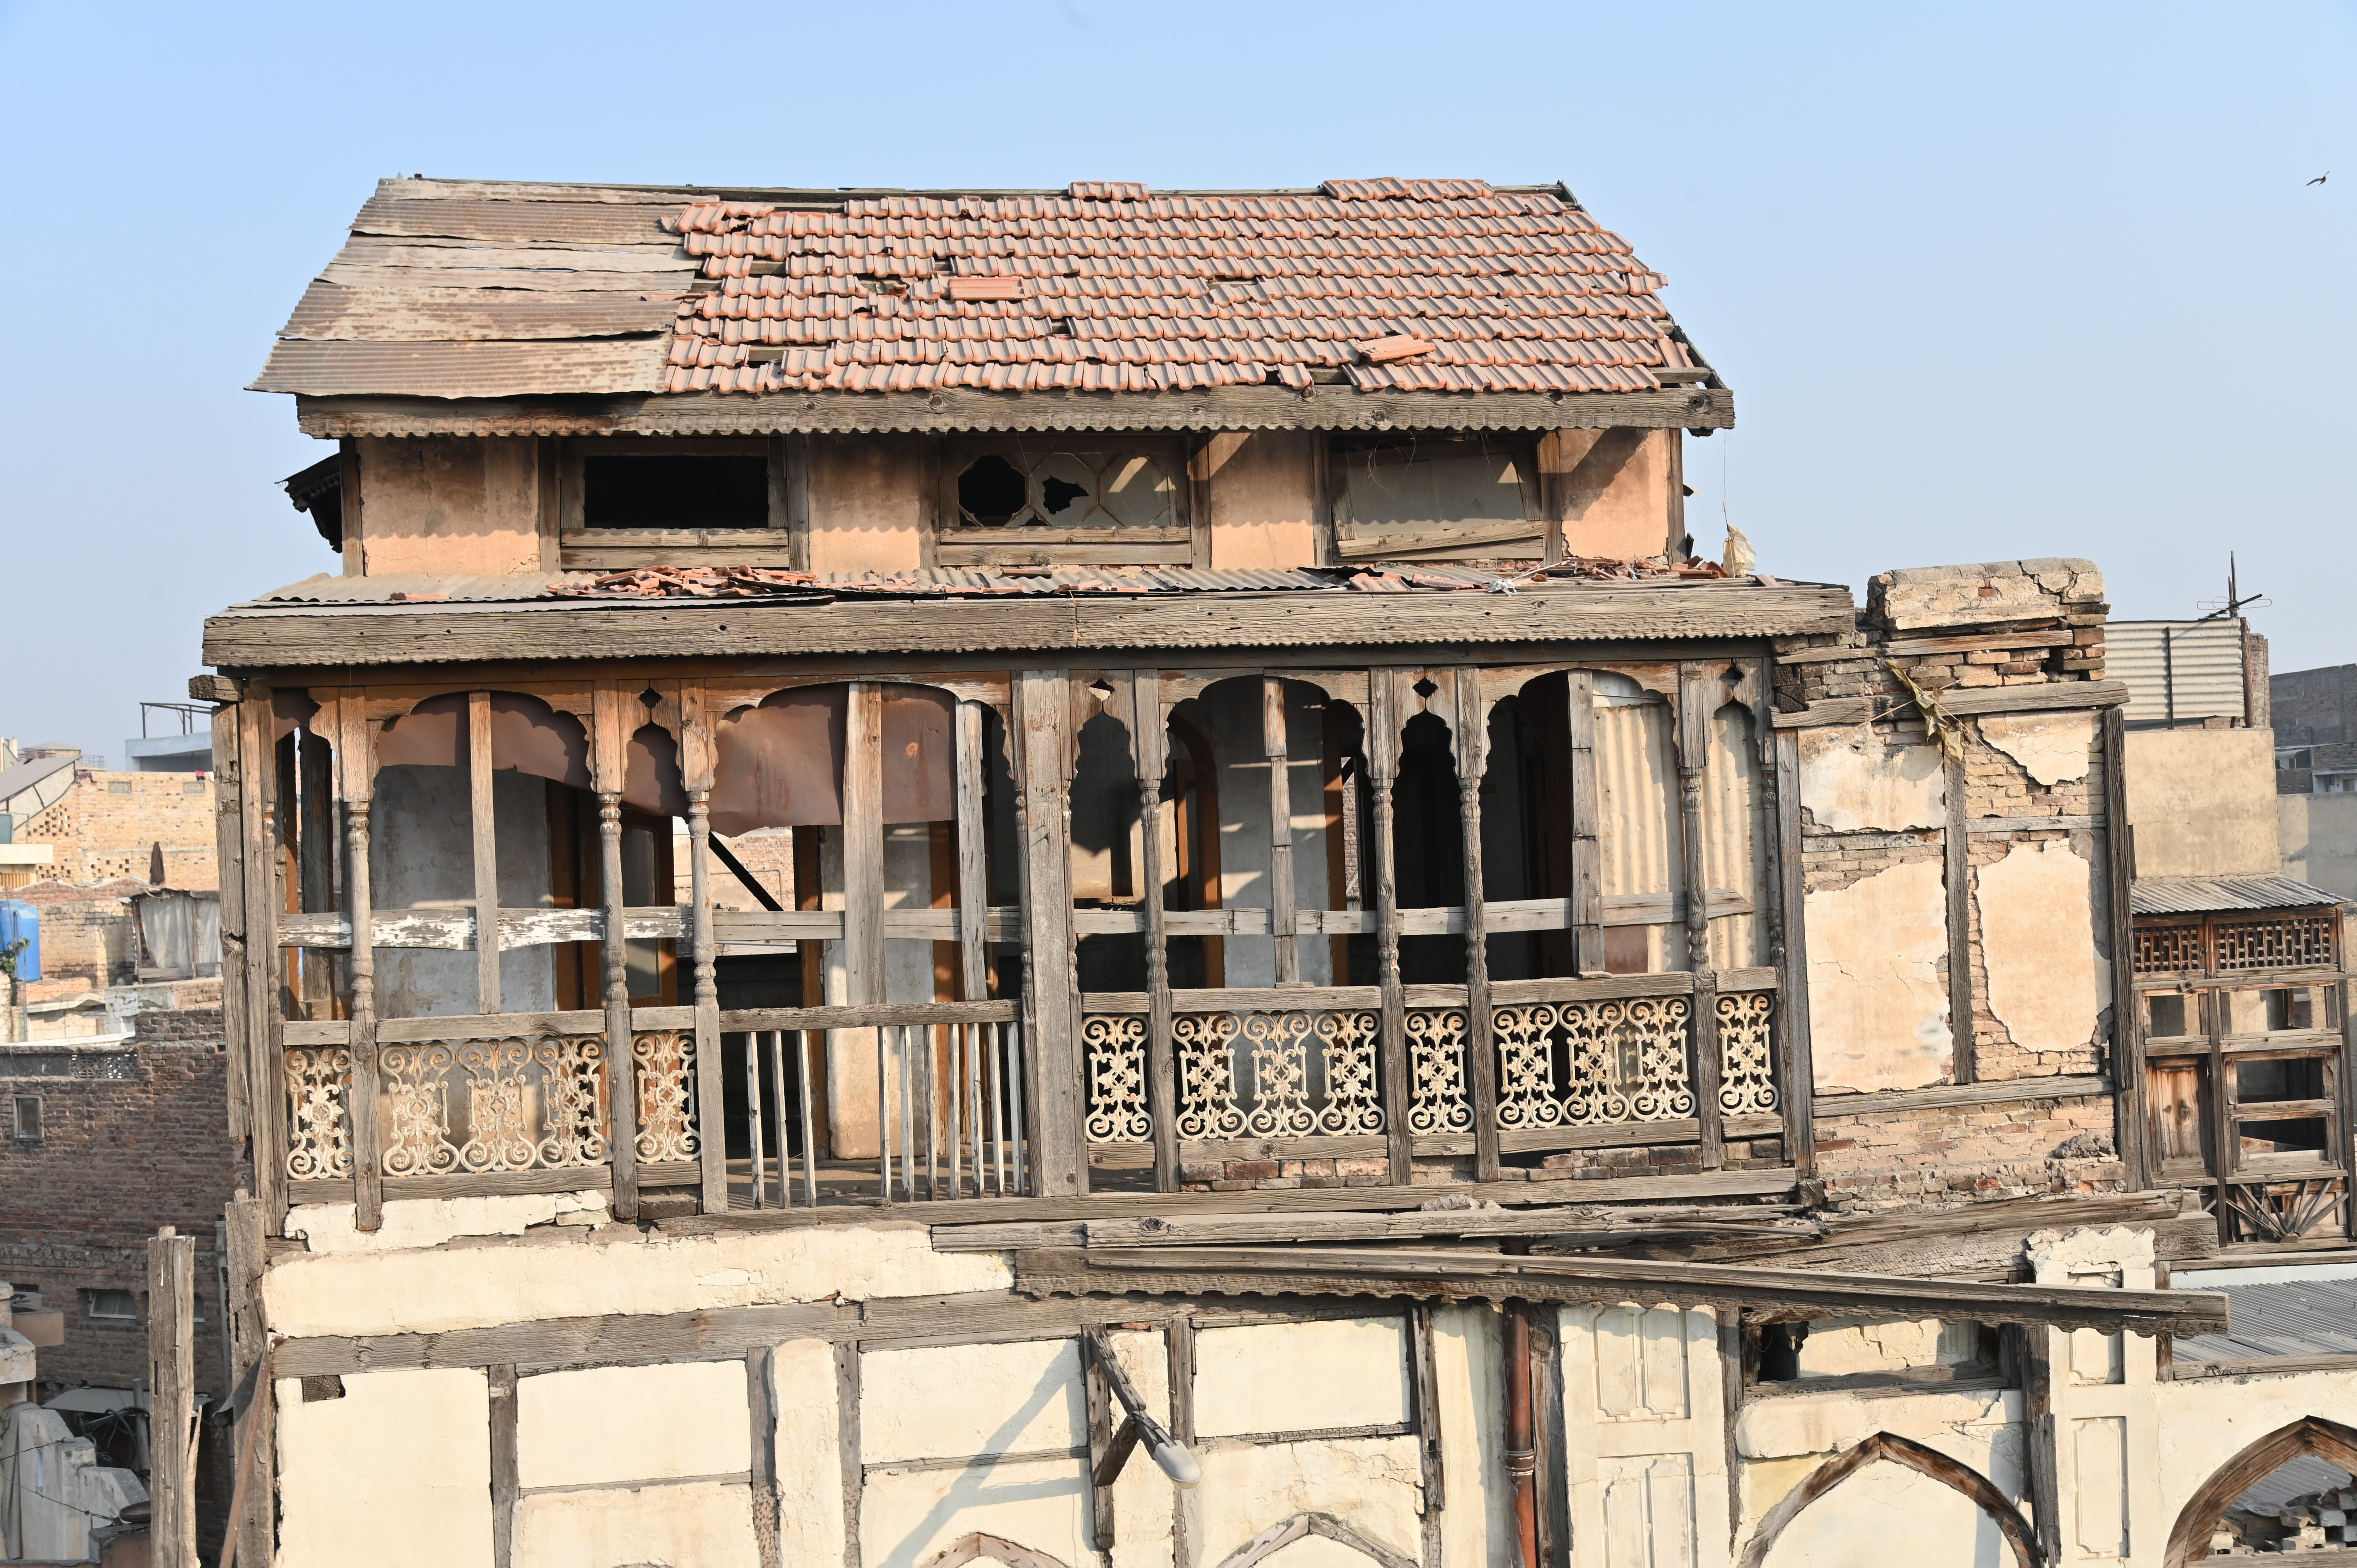 The old deteriorated house located in Sethi Mohalla